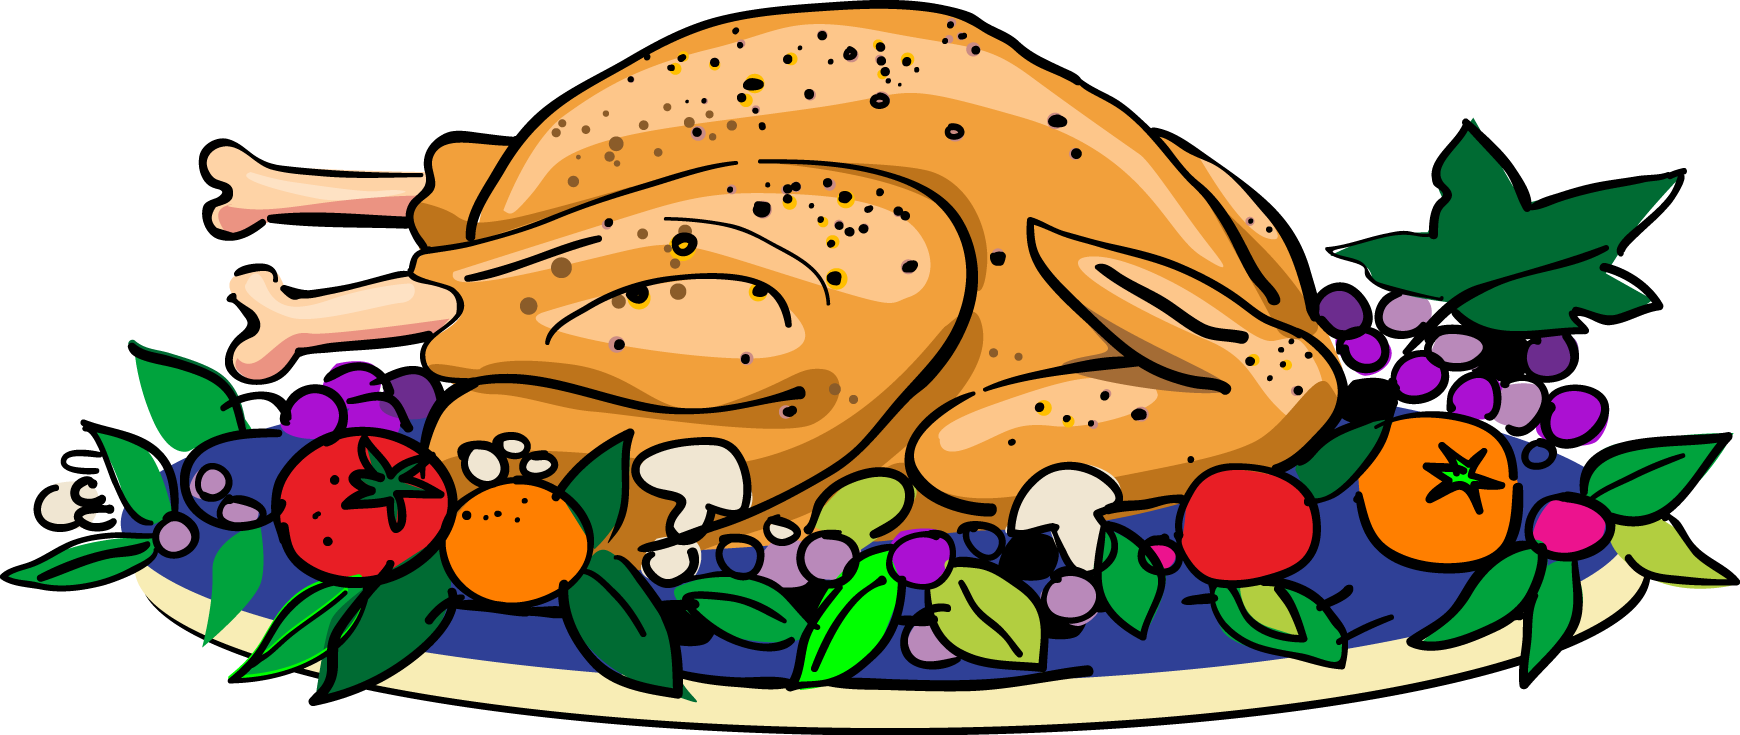 Roasted Turkey Clipart | Clipart Panda - Free Clipart Images